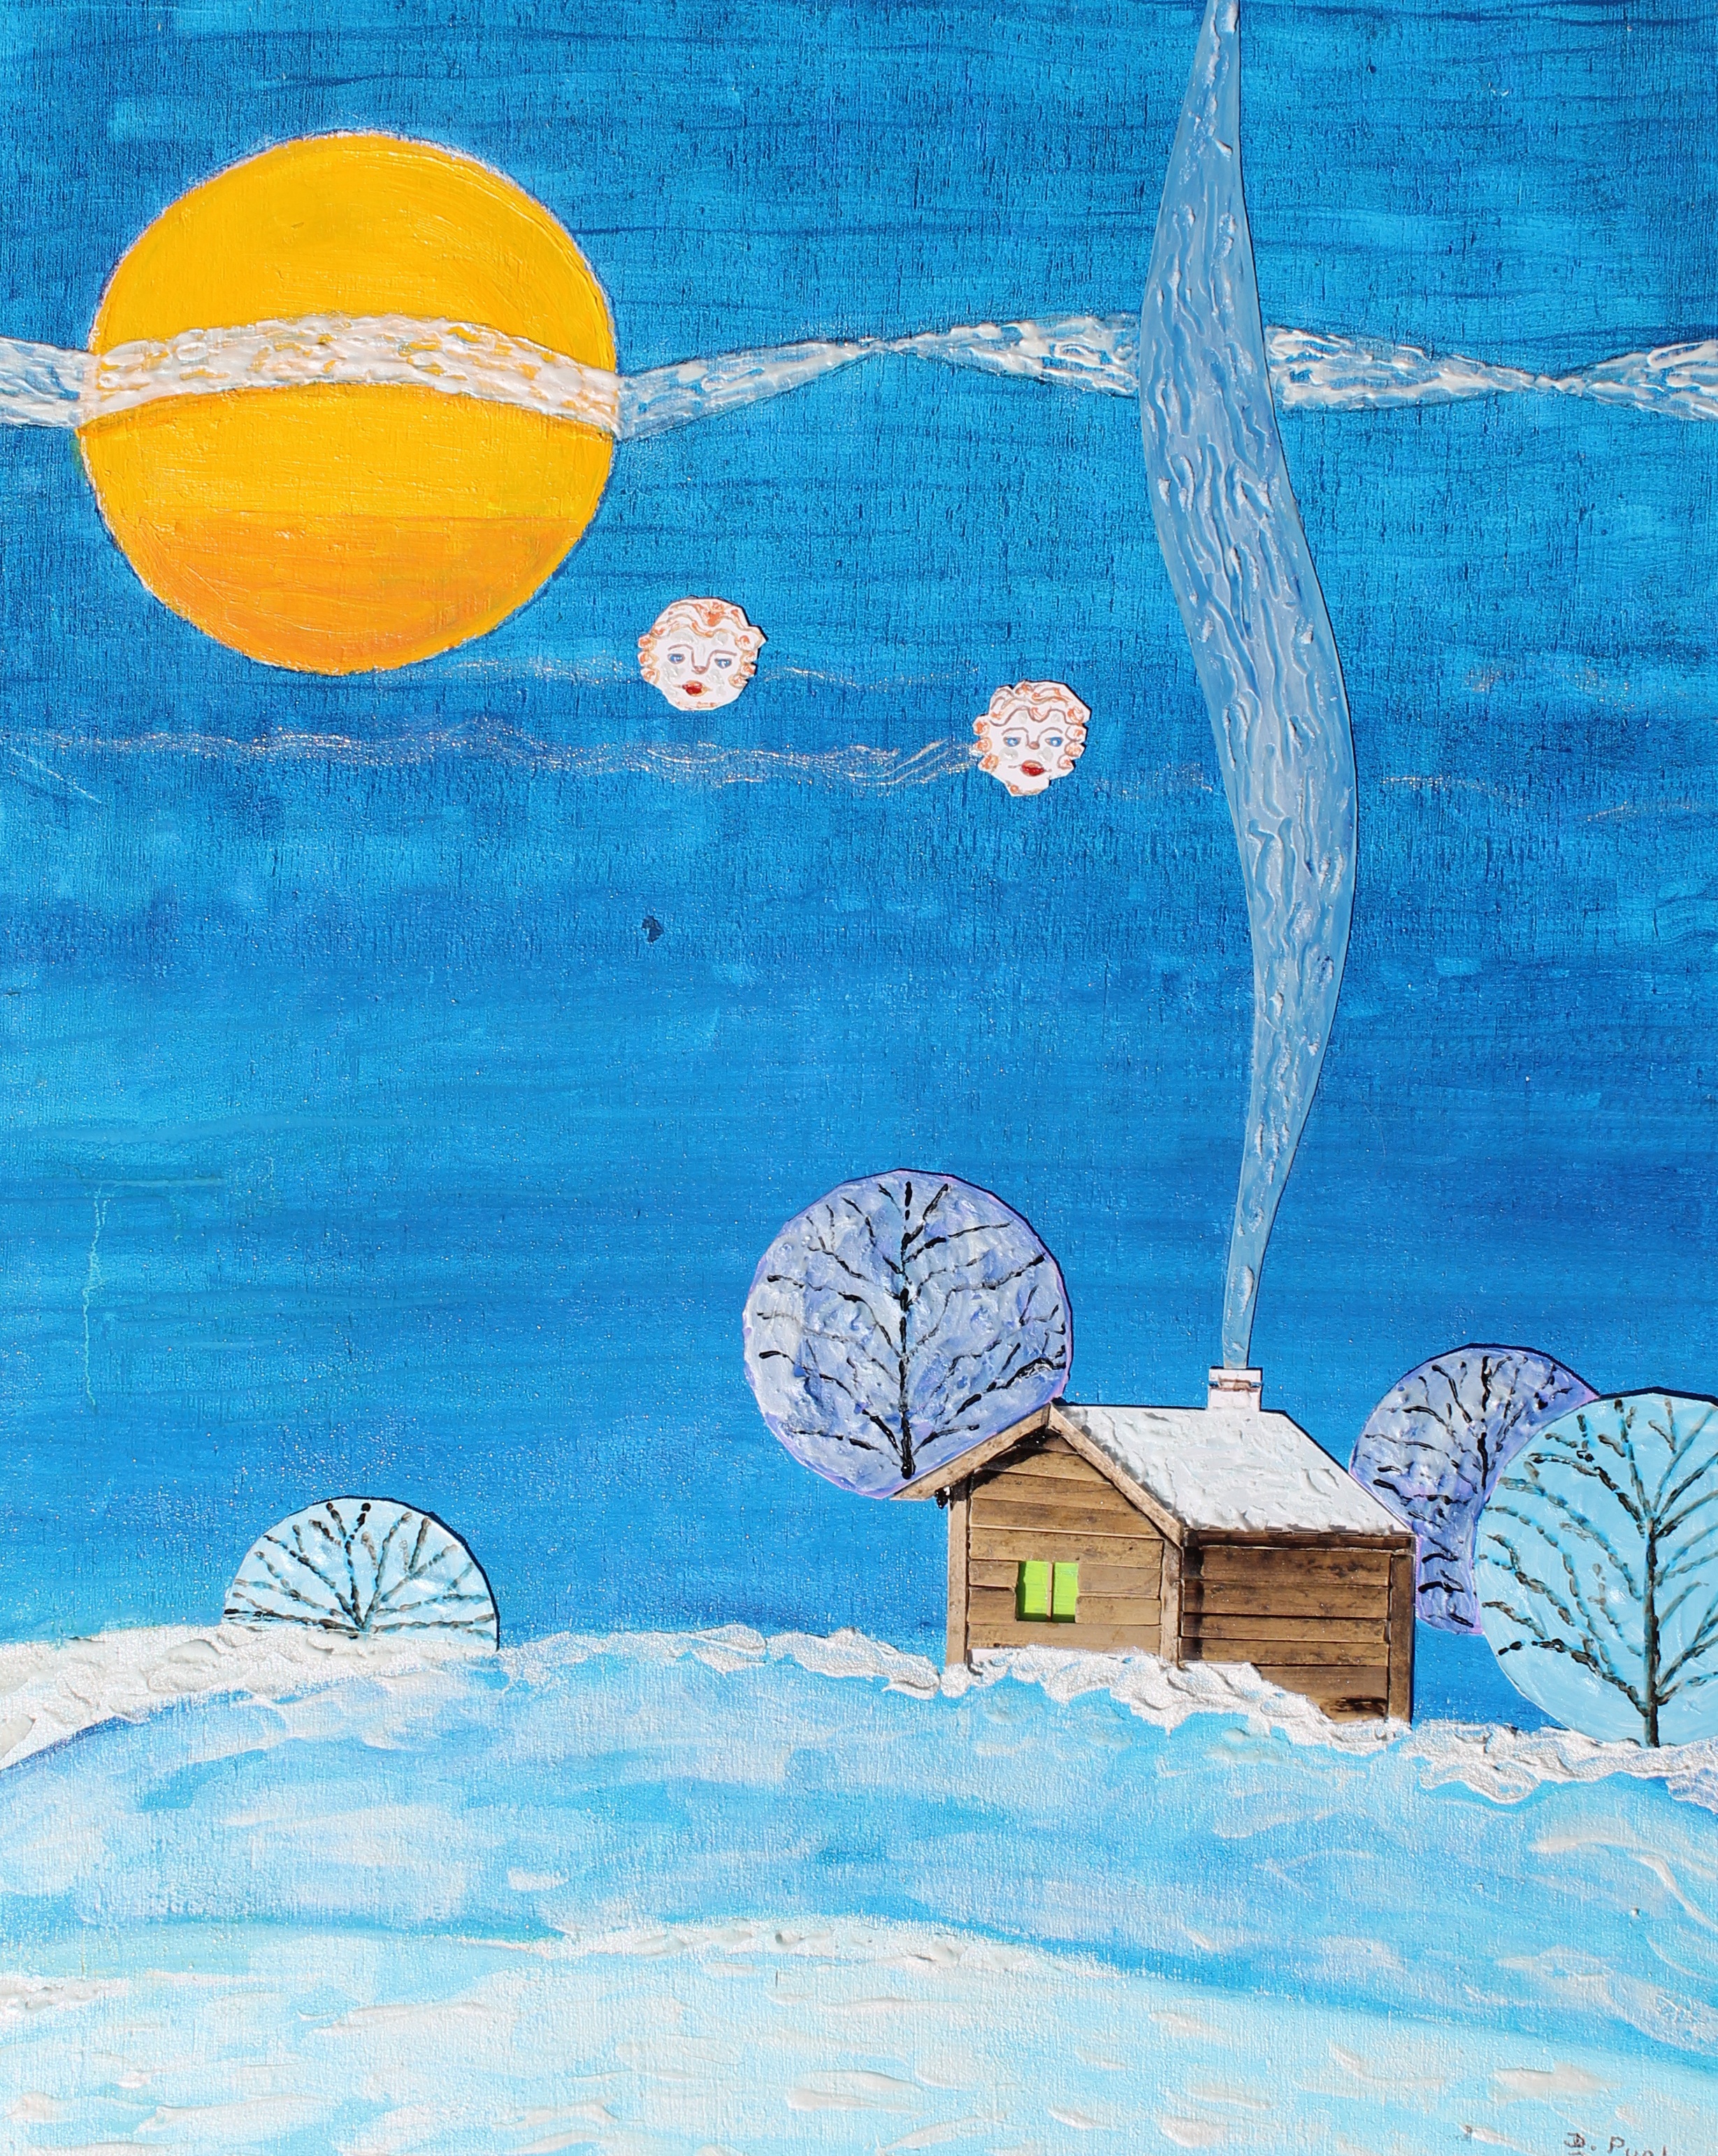 Snow Winter Landscape Drawing Free Image